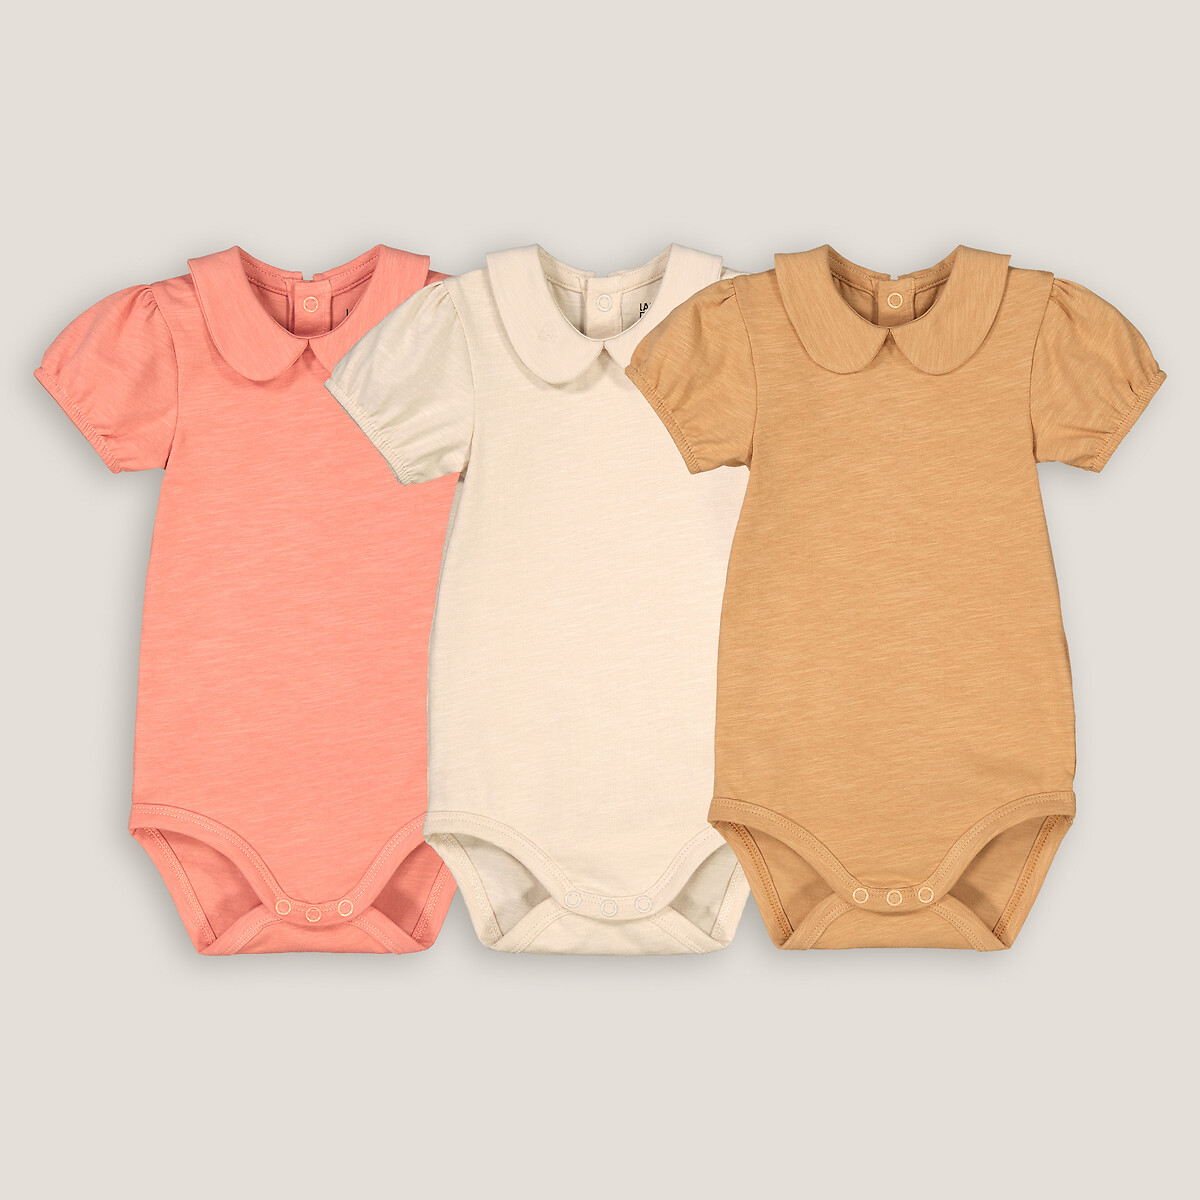 Pack of 3 Bodysuits in Cotton with Peter Pan Collar and Short Sleeves